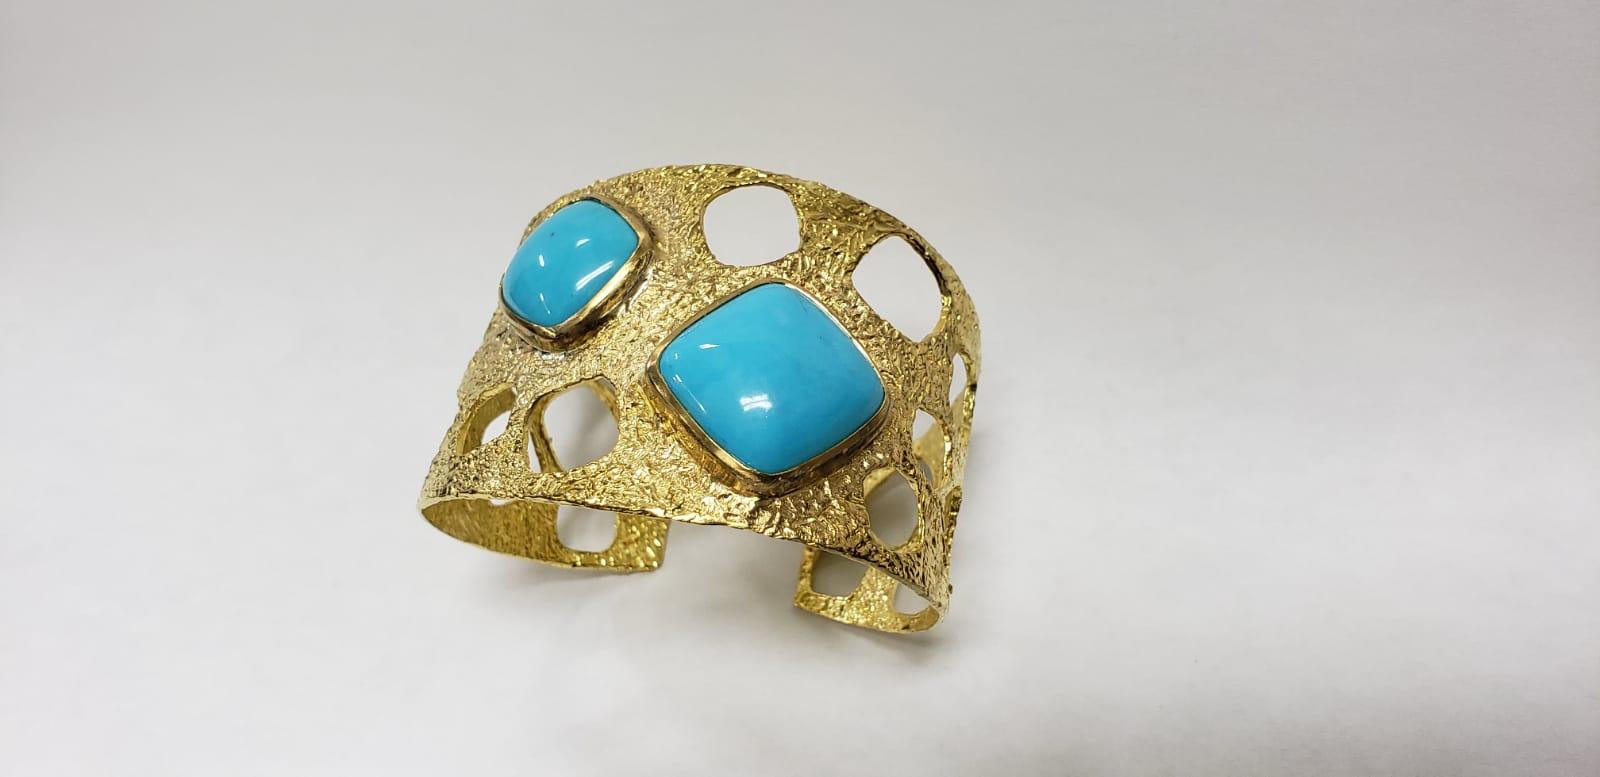 Artisan 22k Gold Handmade Cuff with Turquoise